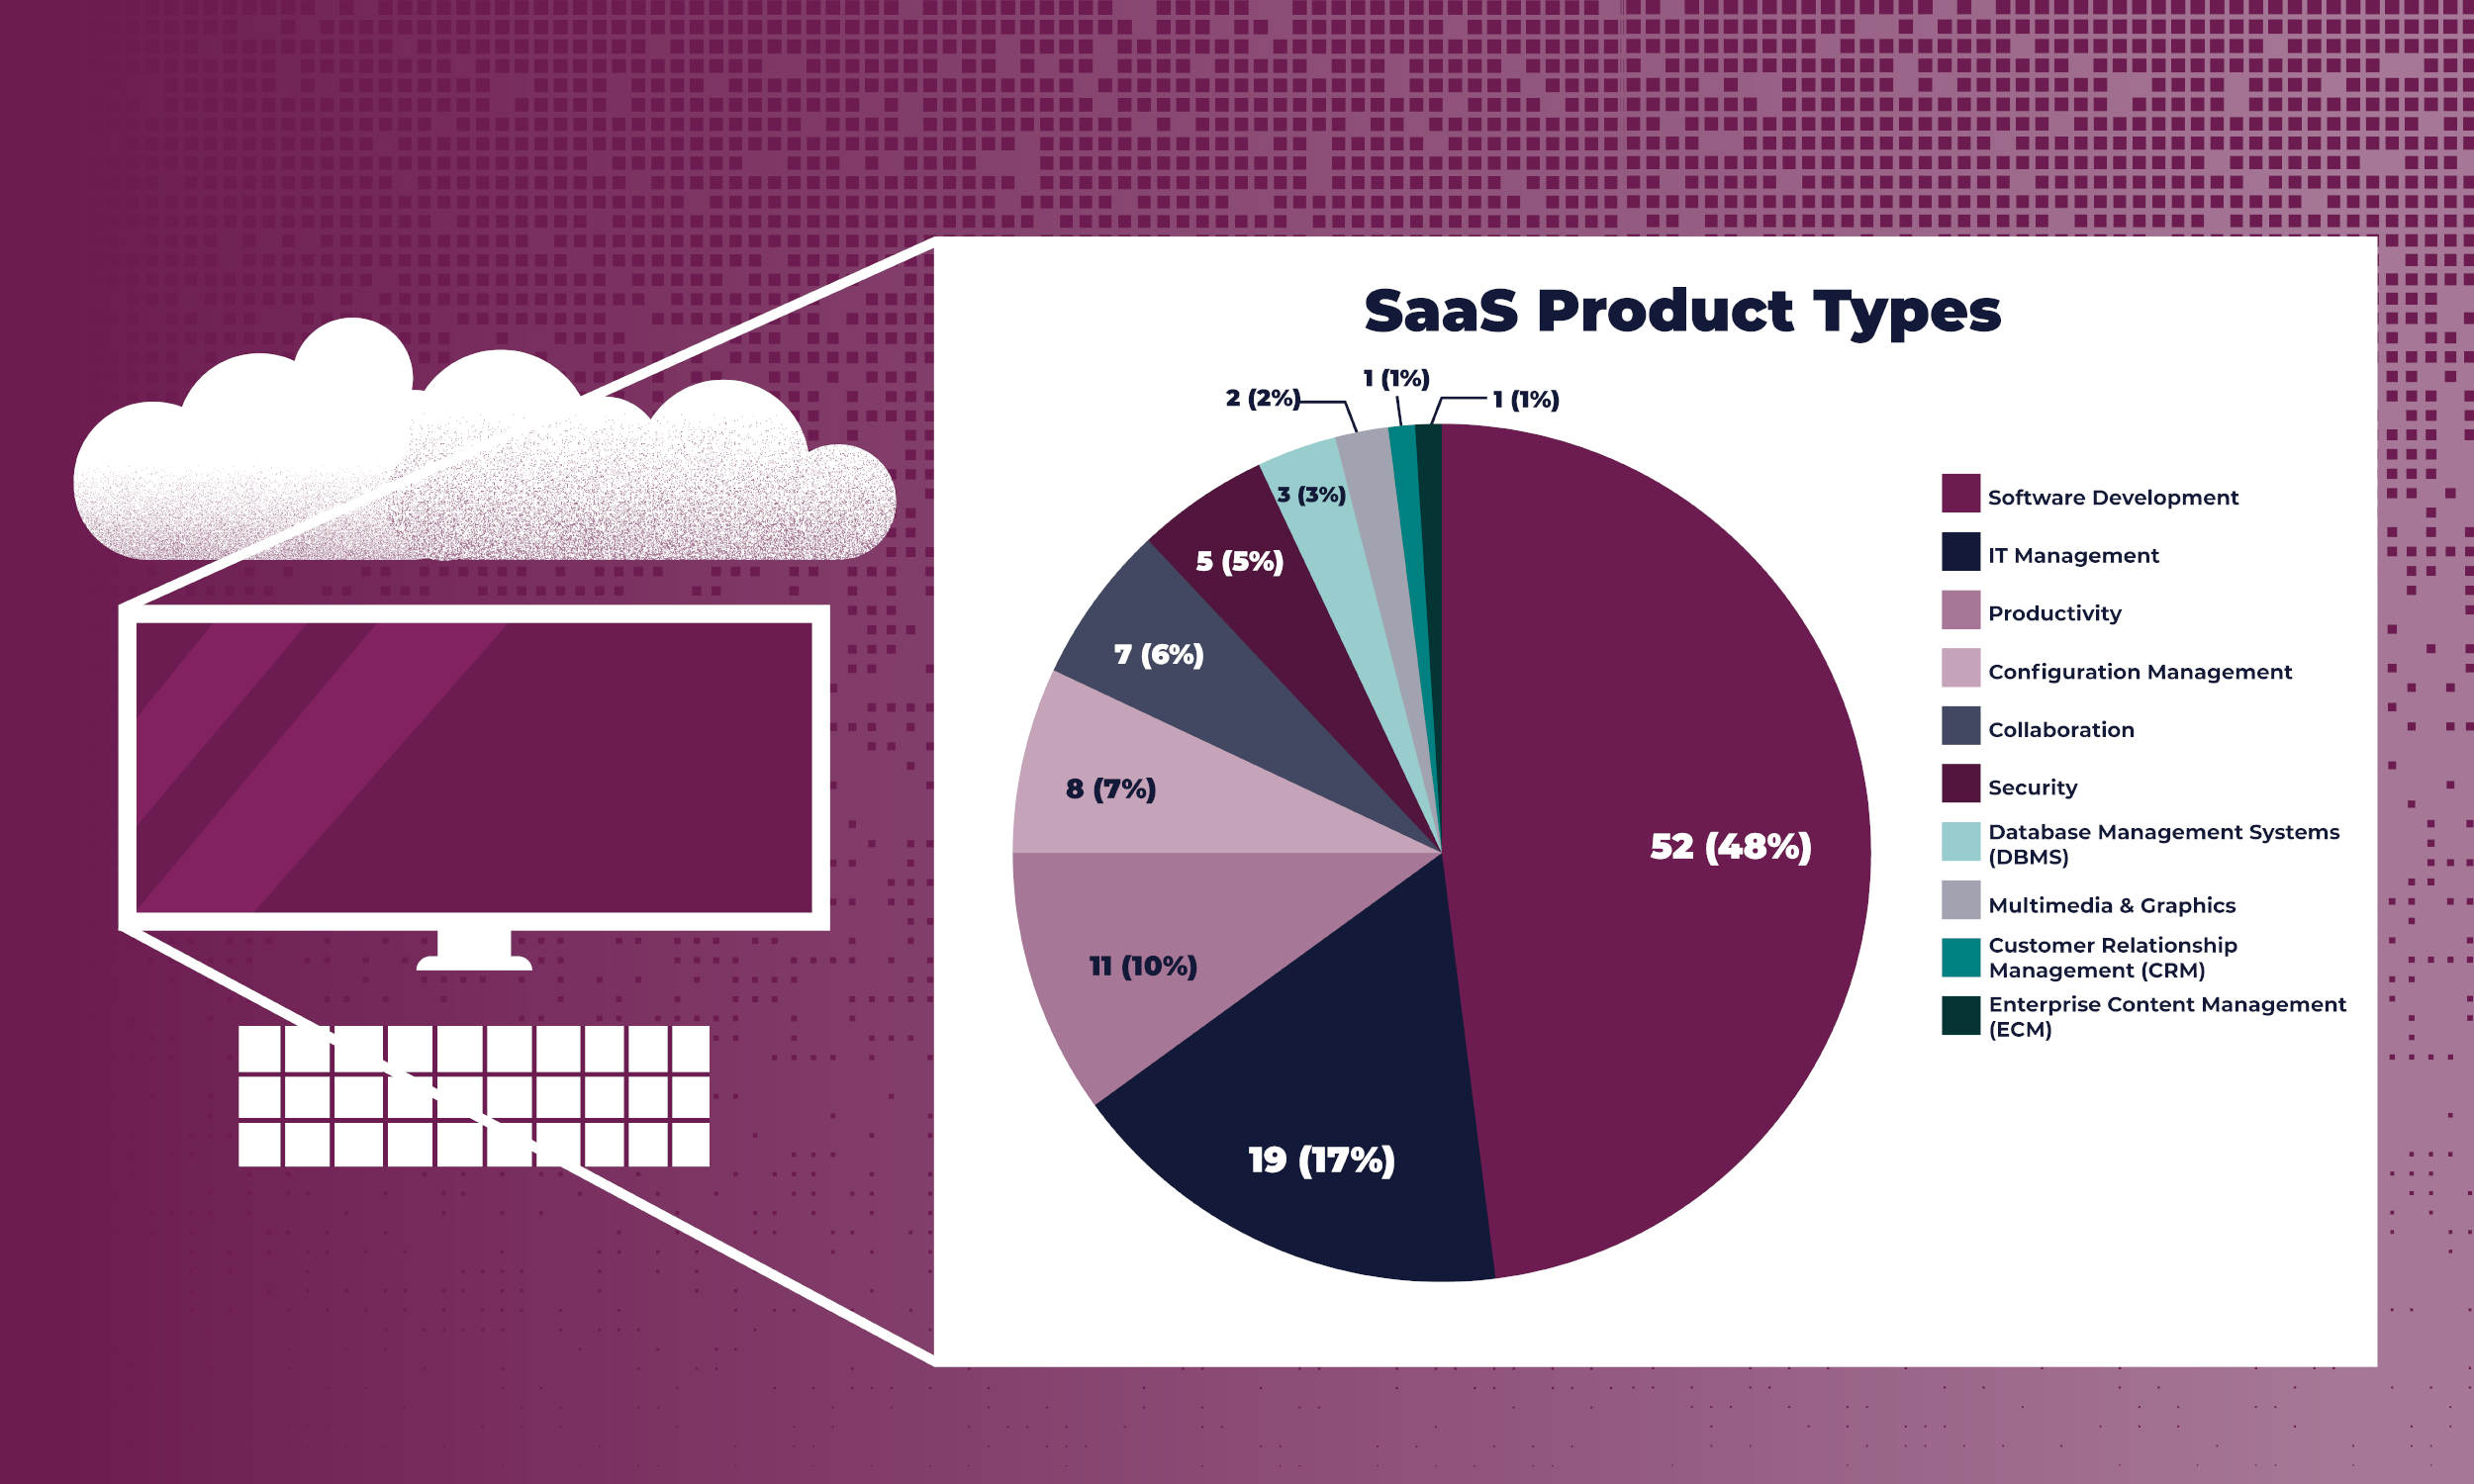 Pie chart of SaaS product types at CMS by category: 52 (48%) software development, 19 (17%) IT management, 11 (10%) productivity, 8 (7%) configuration management, 7 (6%) collaboration, 5 (5%) security, 3 (3%) database management systems (DBMS), 2 (2%) multimedia and graphics, 1 (1%) customer relationship management (CRM), 1 (1%) enterprise content management.      